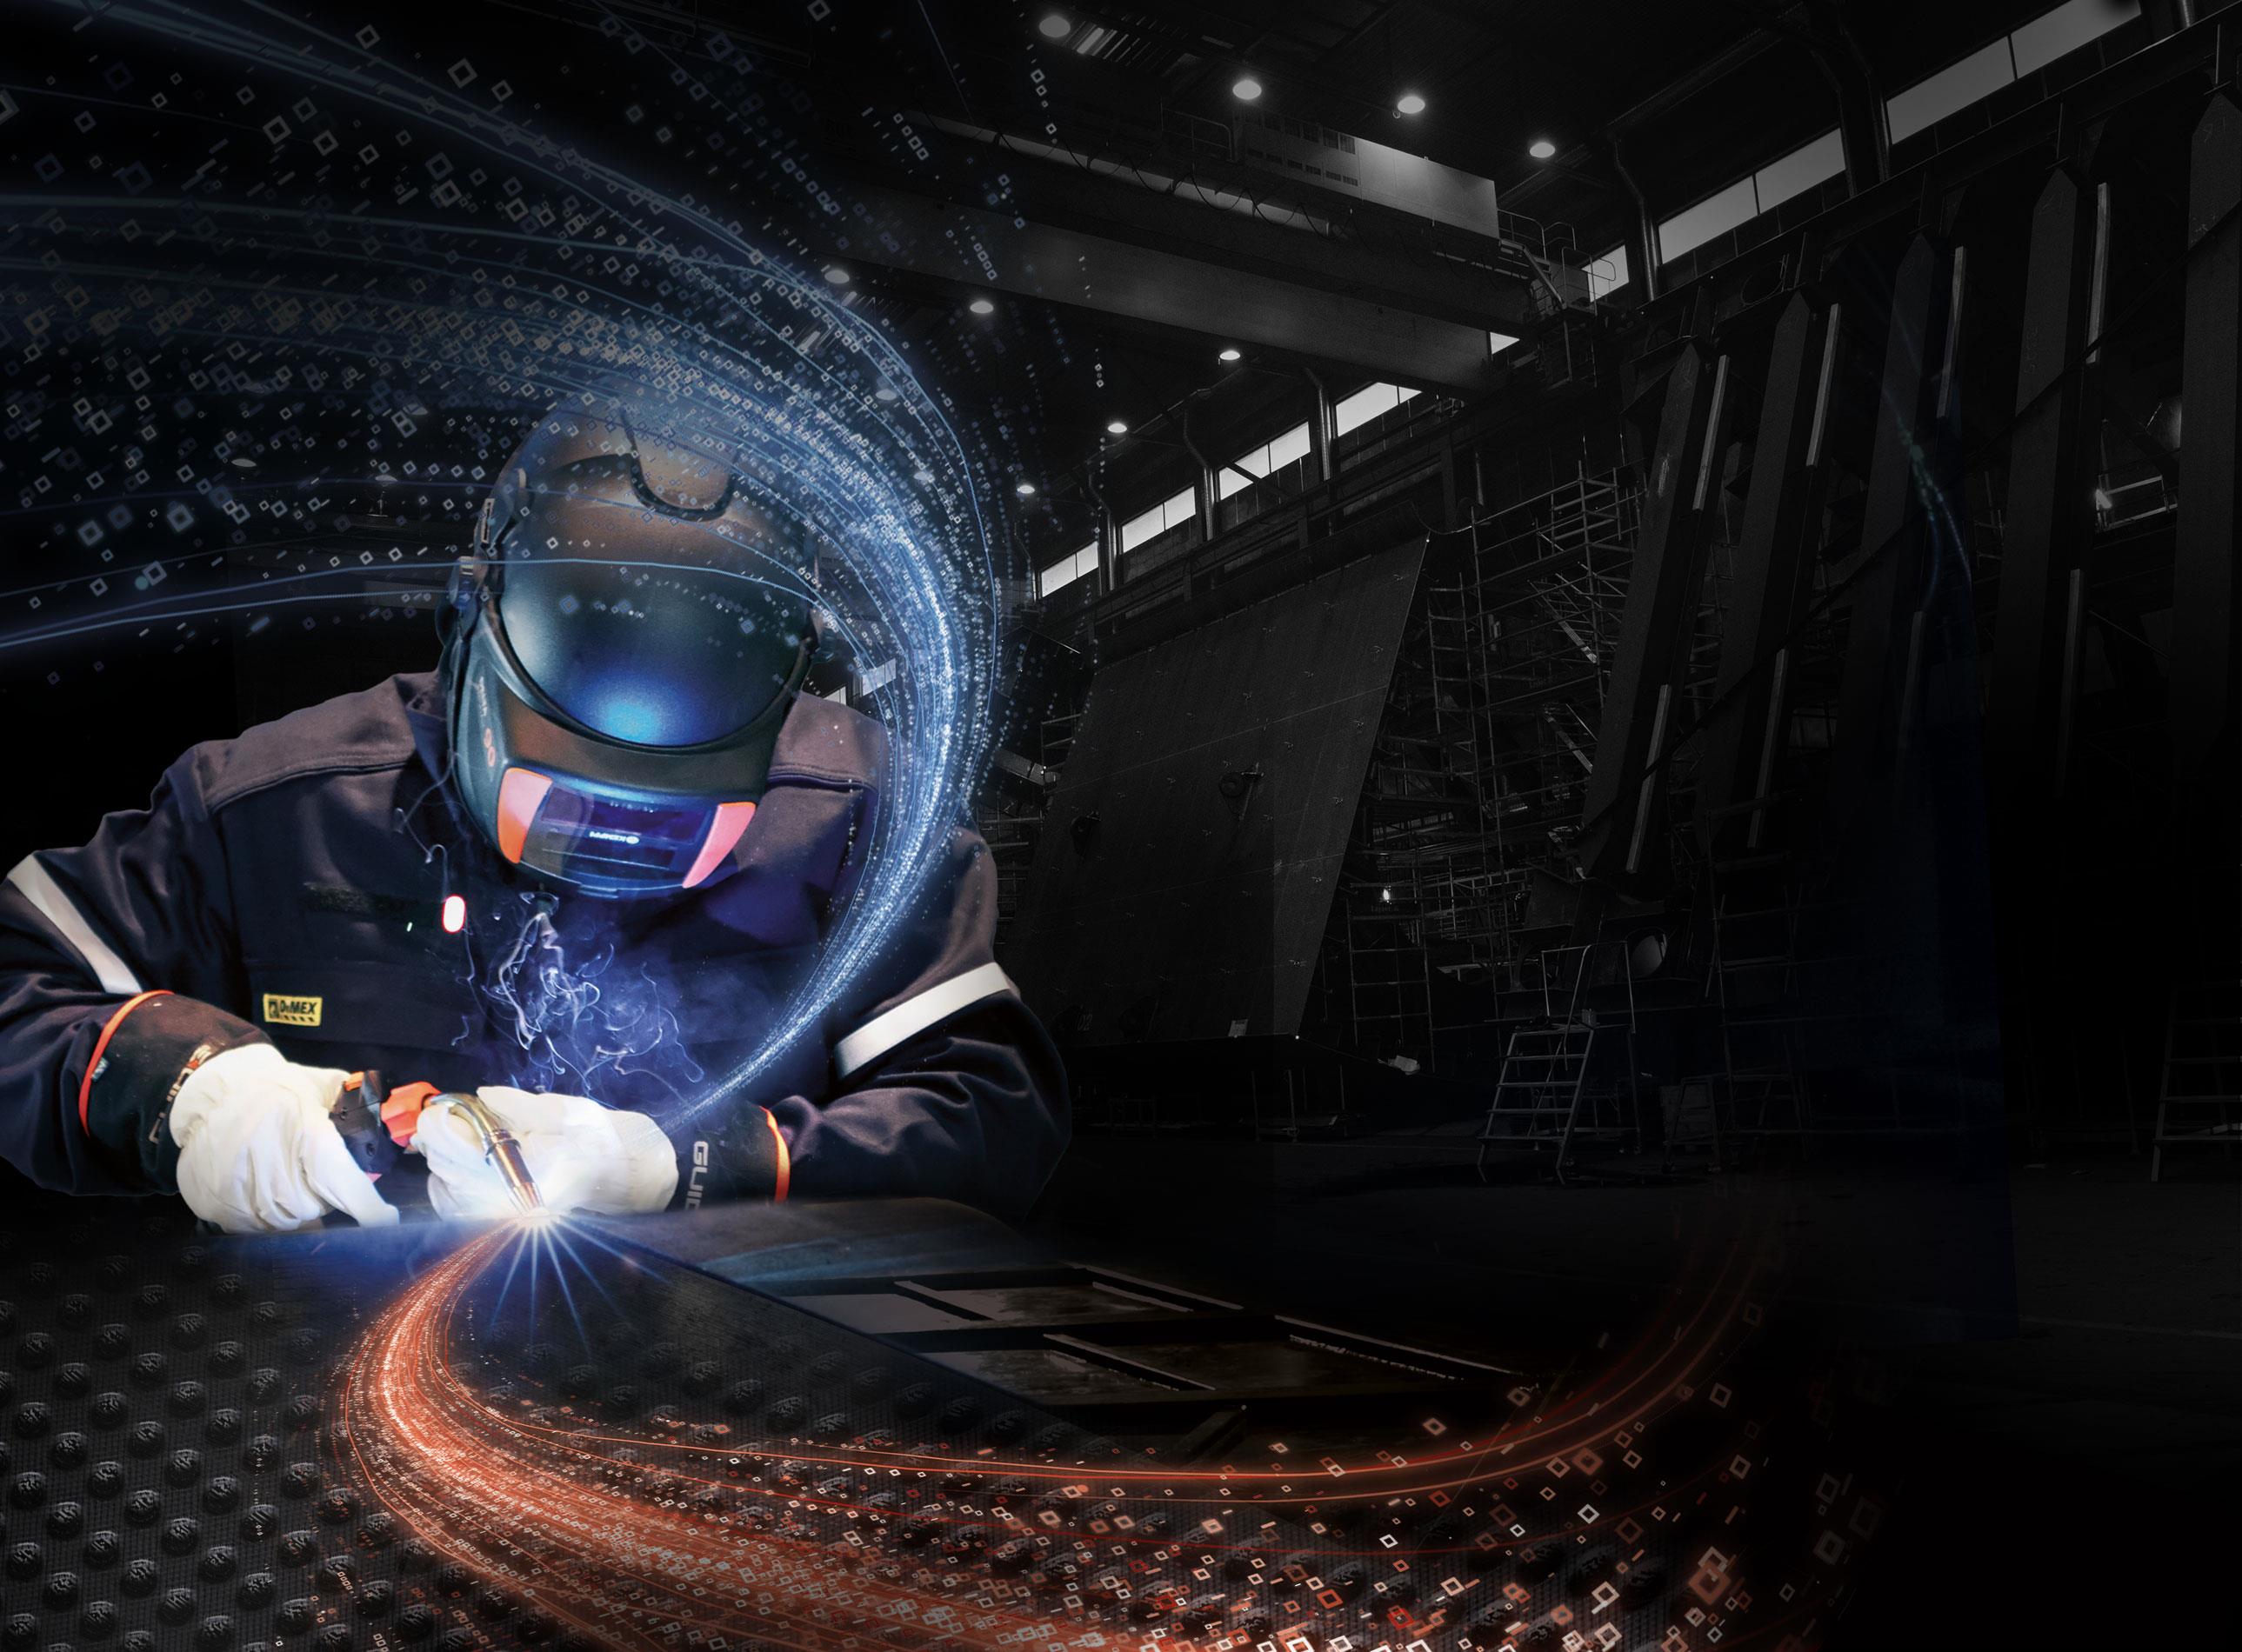 Kemppi: Improving Customers Business Through Integration of Data and Analysis Welding Equipment manufacturer Kemppi is in the forefront of utilizing digitalization in all its business operations.